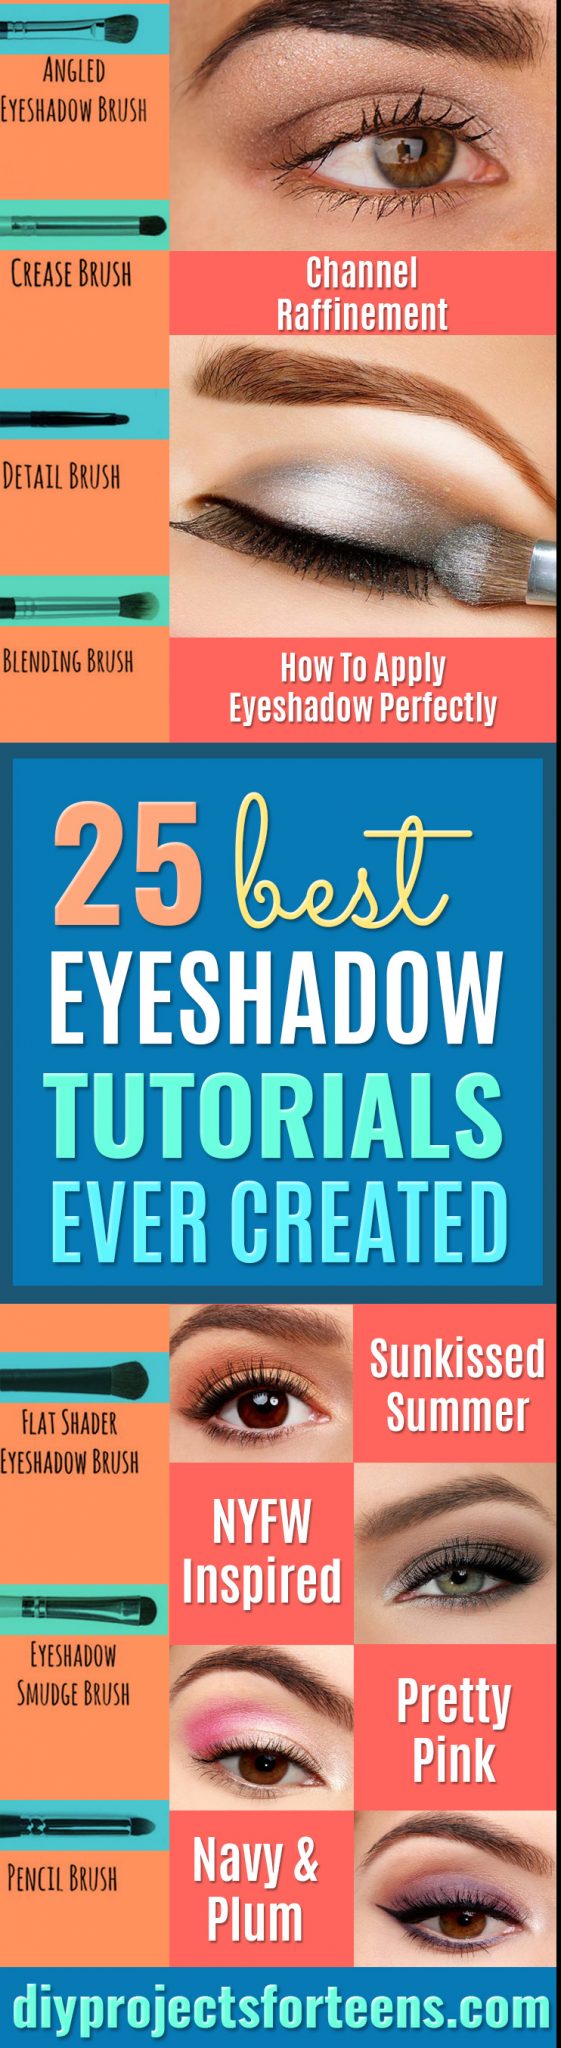 25 Best Eyeshadow Tutorials Ever Created - DIY Projects for Teens